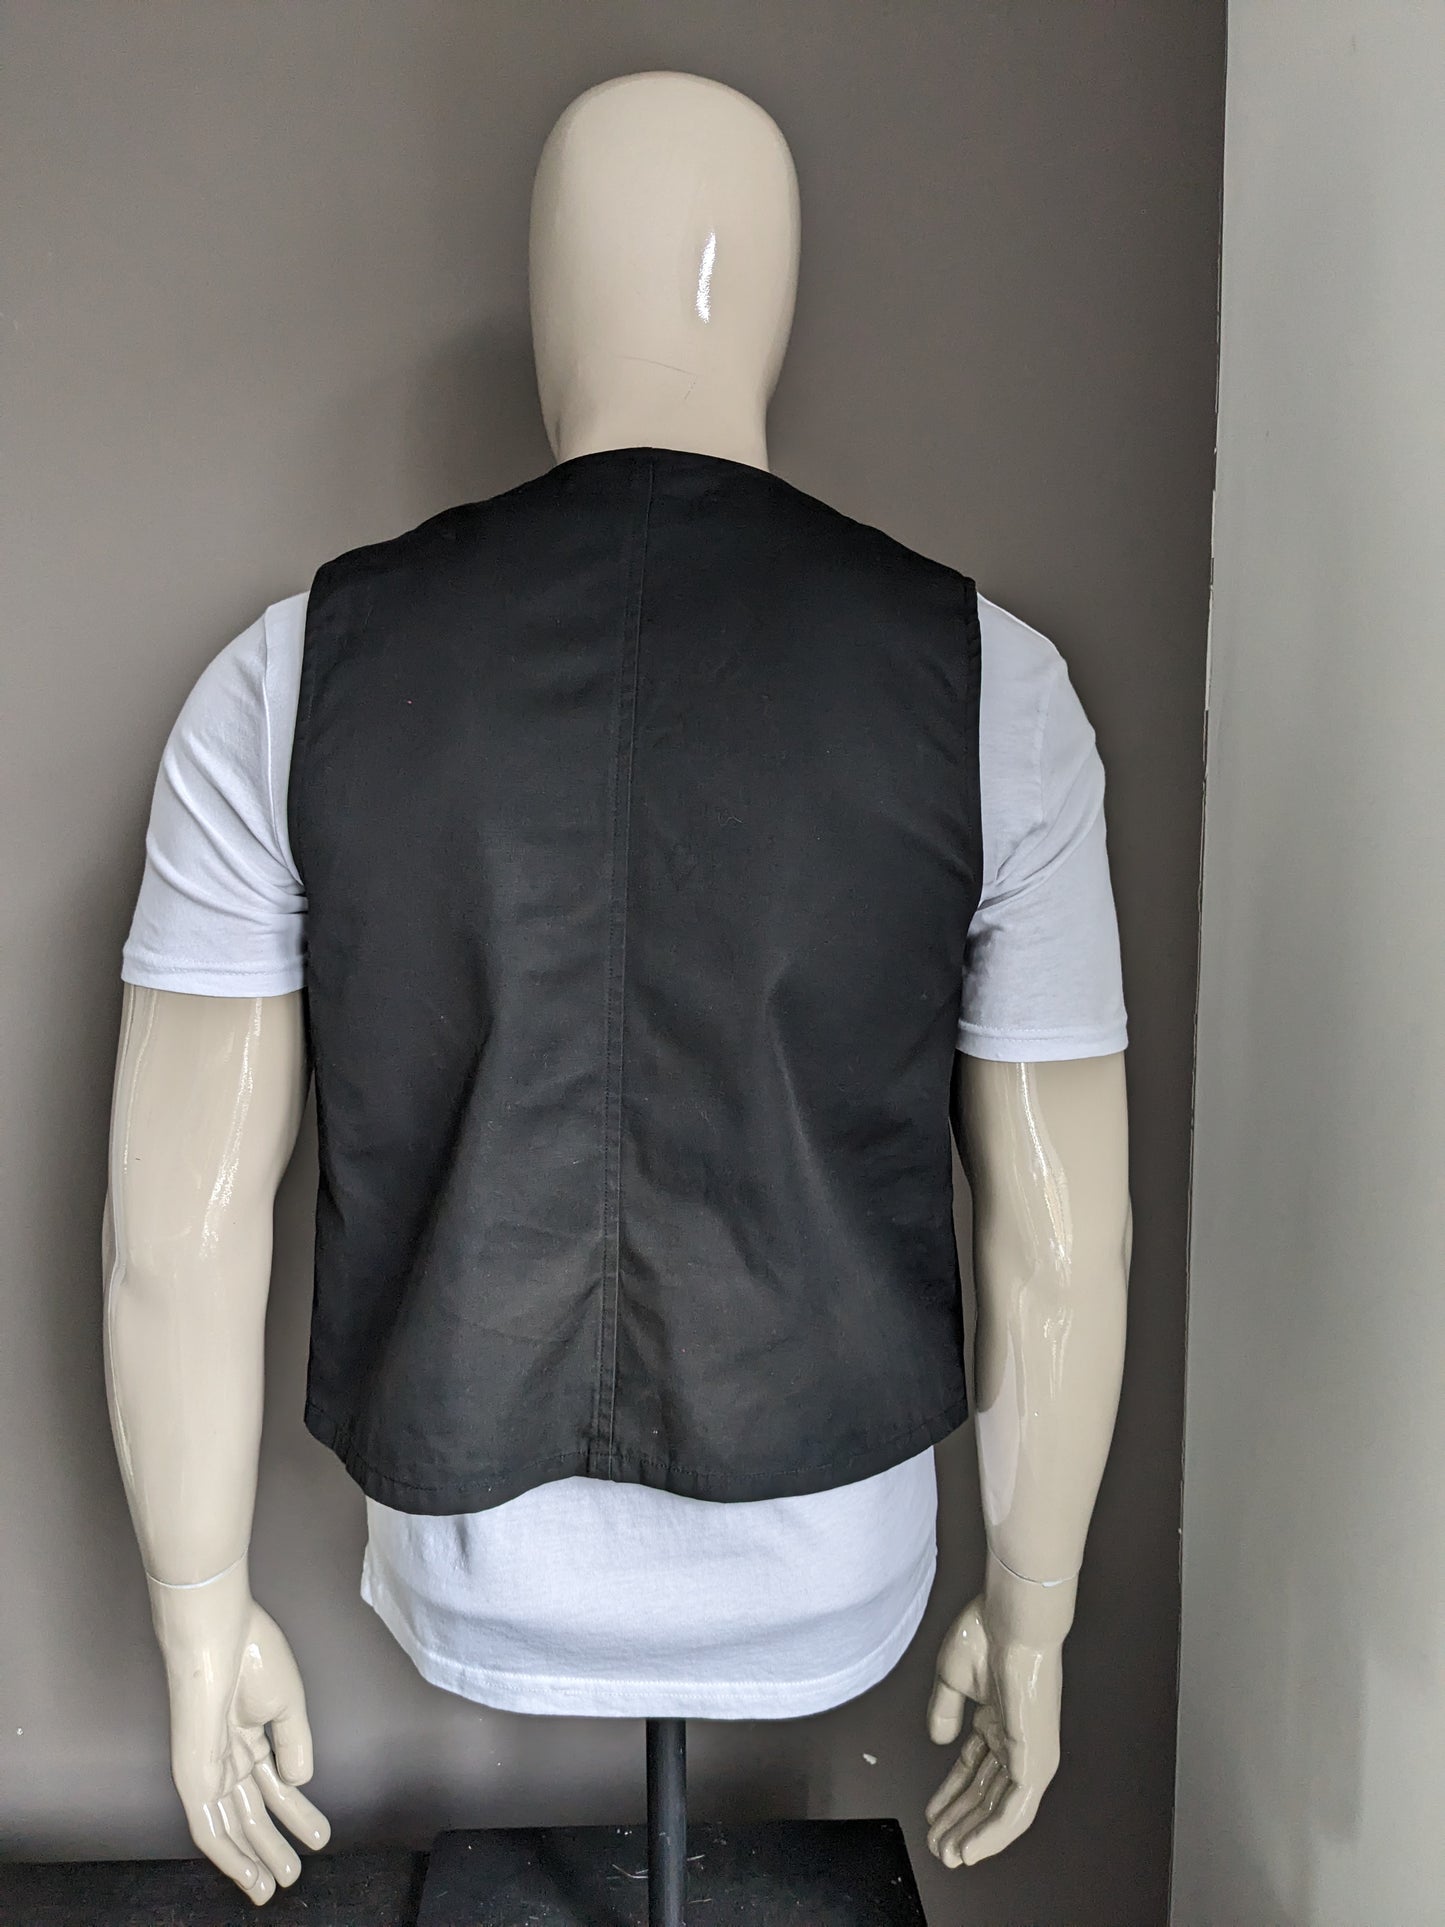 Gilet with bags. Black colored. Size M. #333.